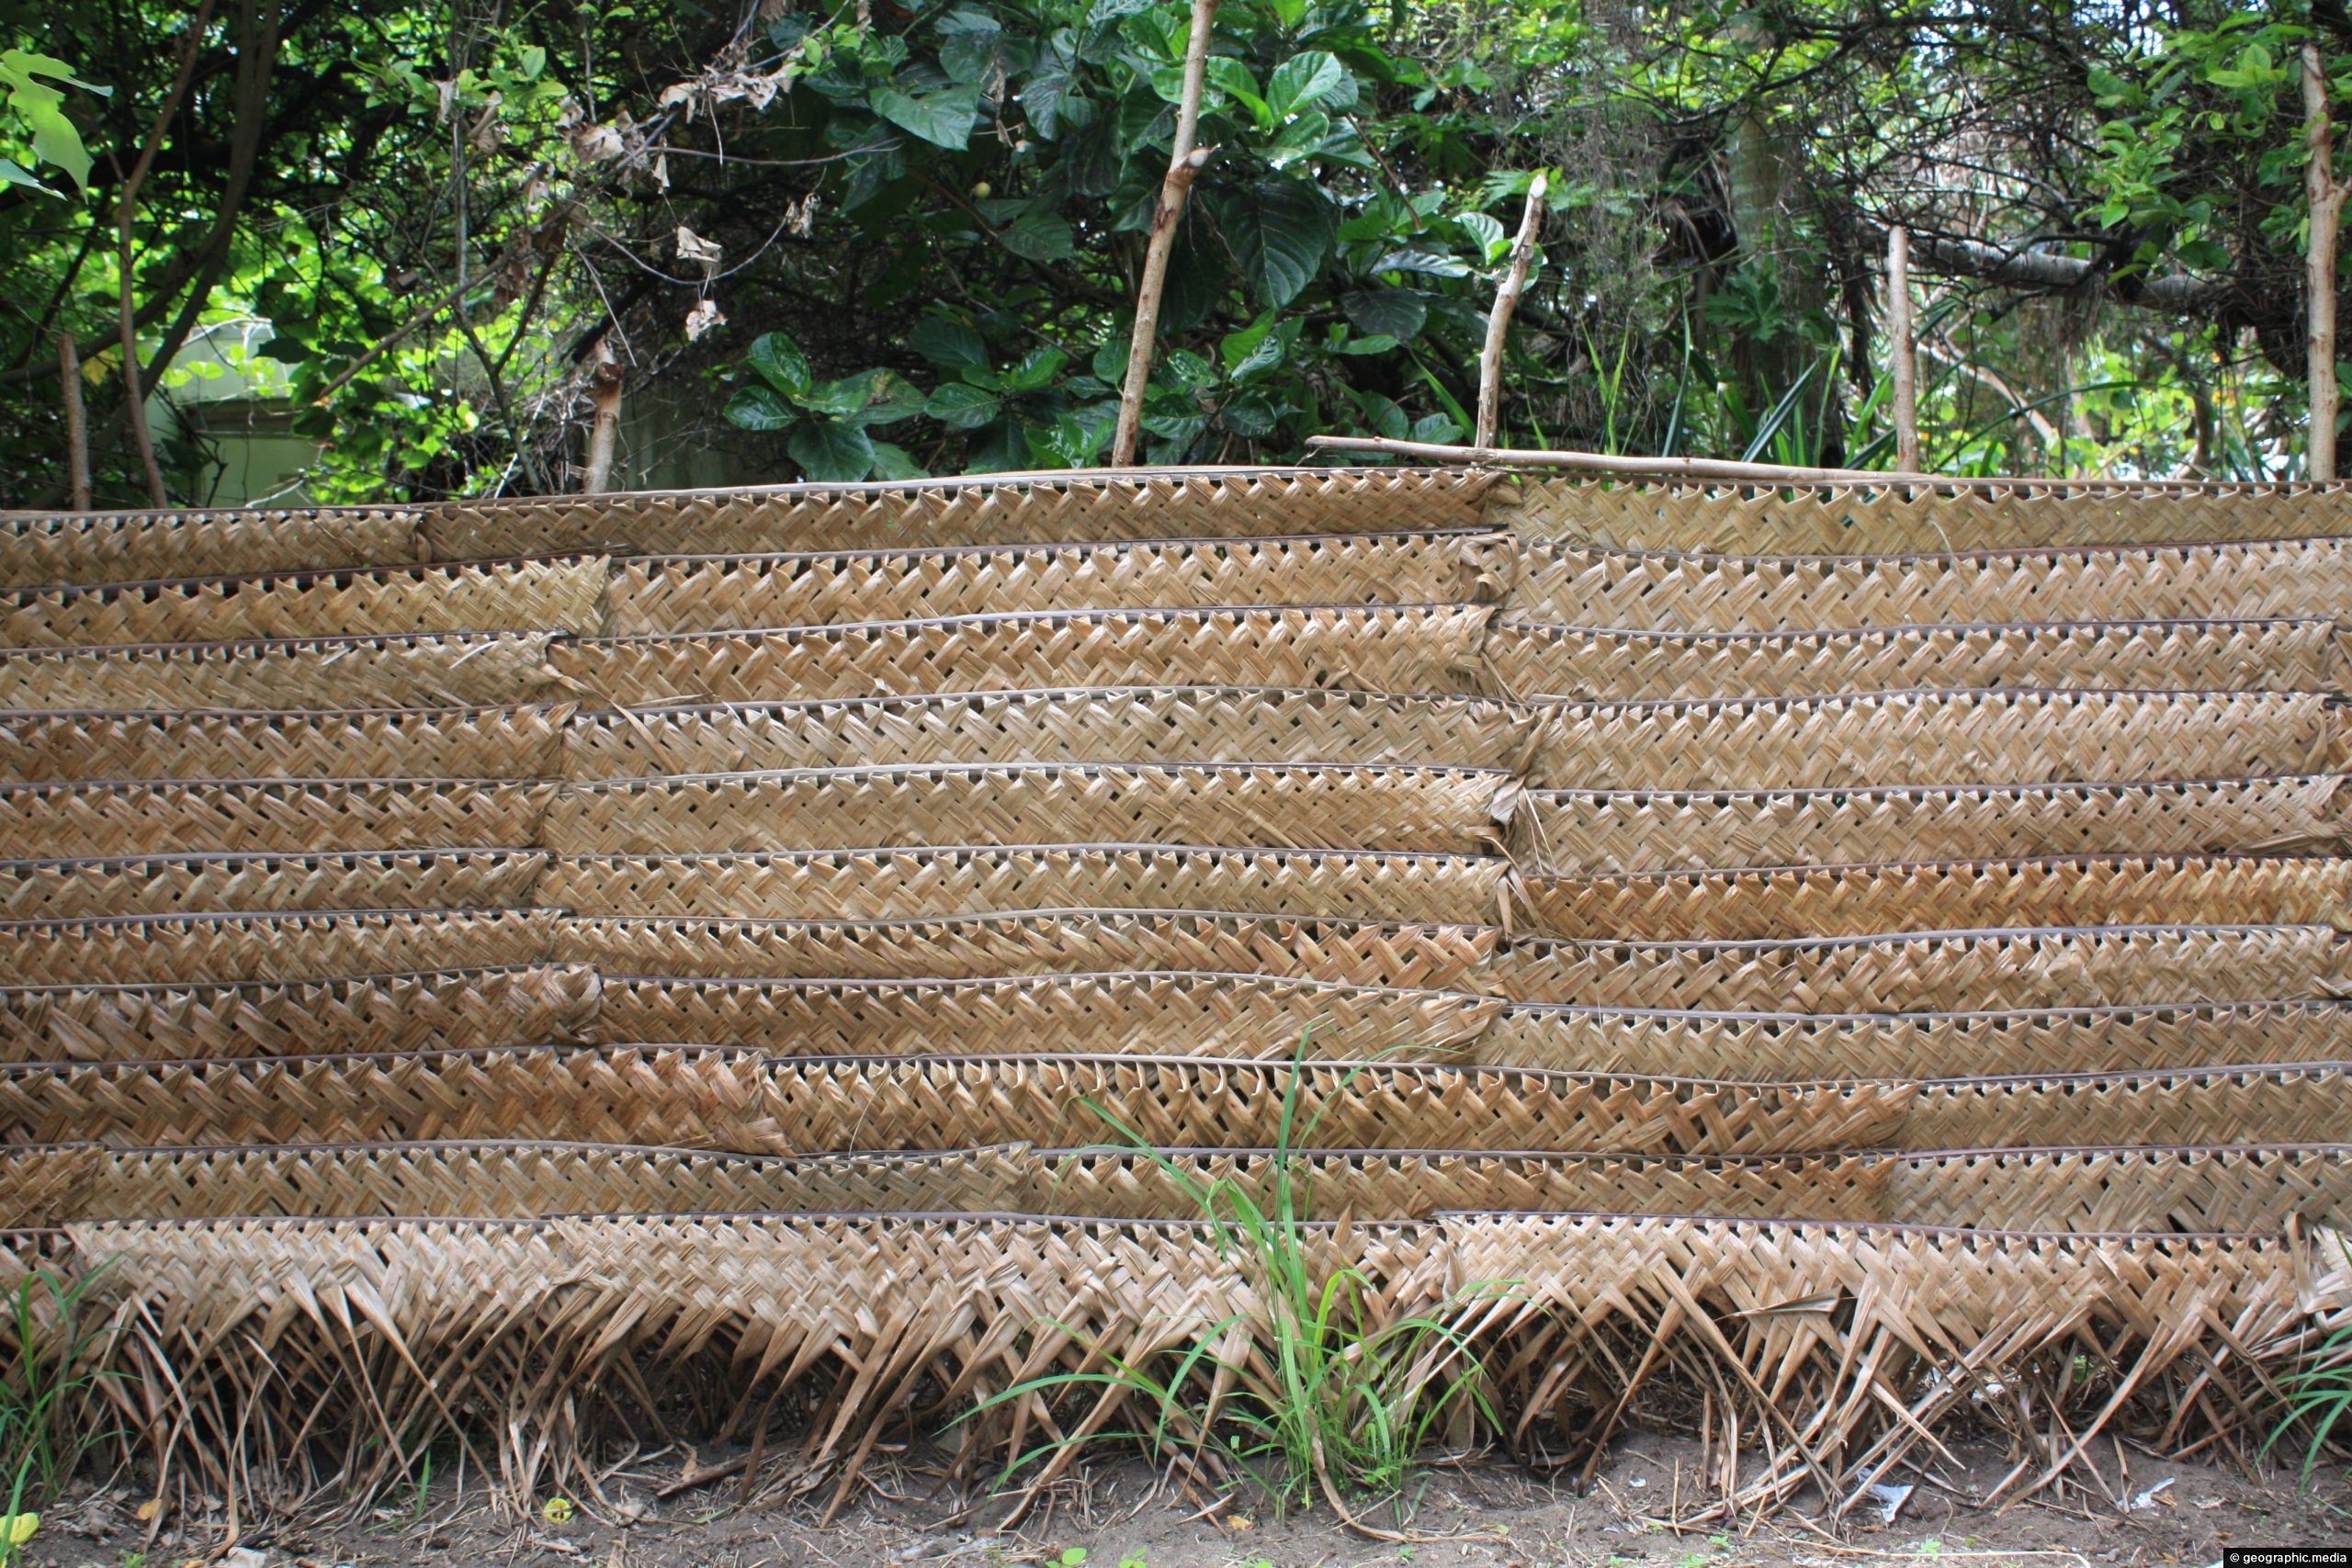 Fence in Tong made of traditional materials